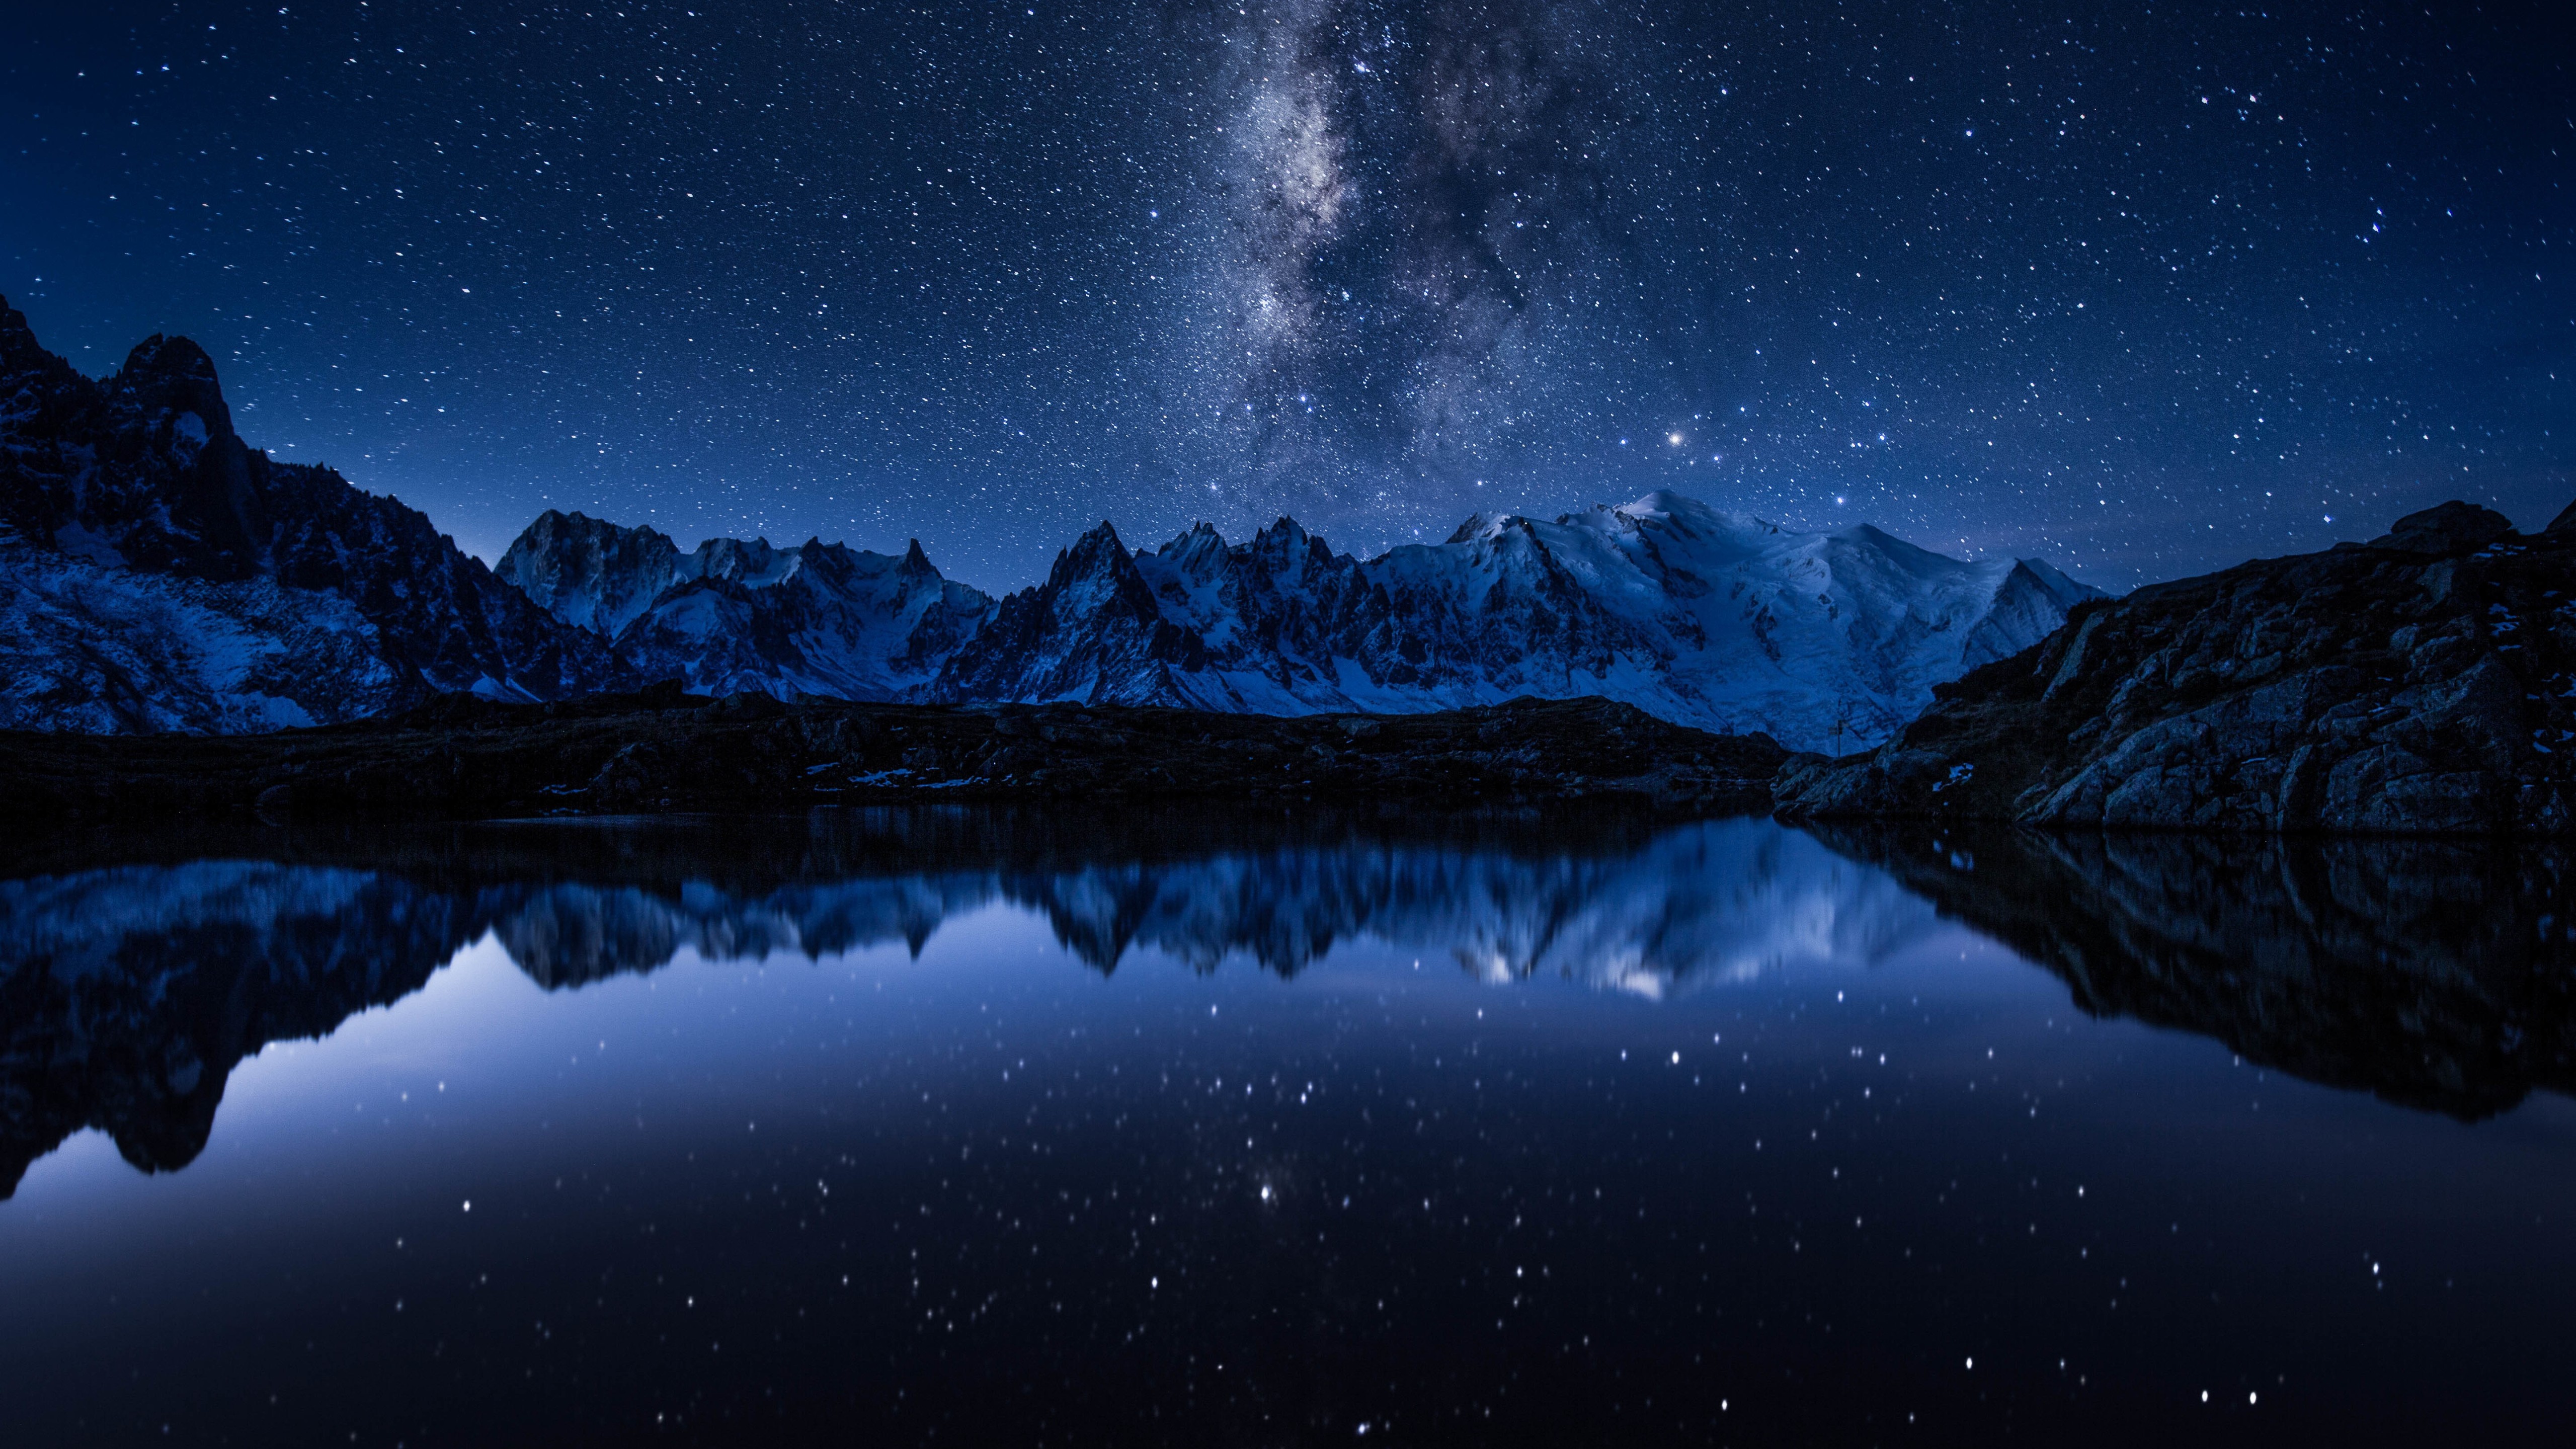 hd wallpapers 5120x2880,sky,nature,natural landscape,reflection,mountain